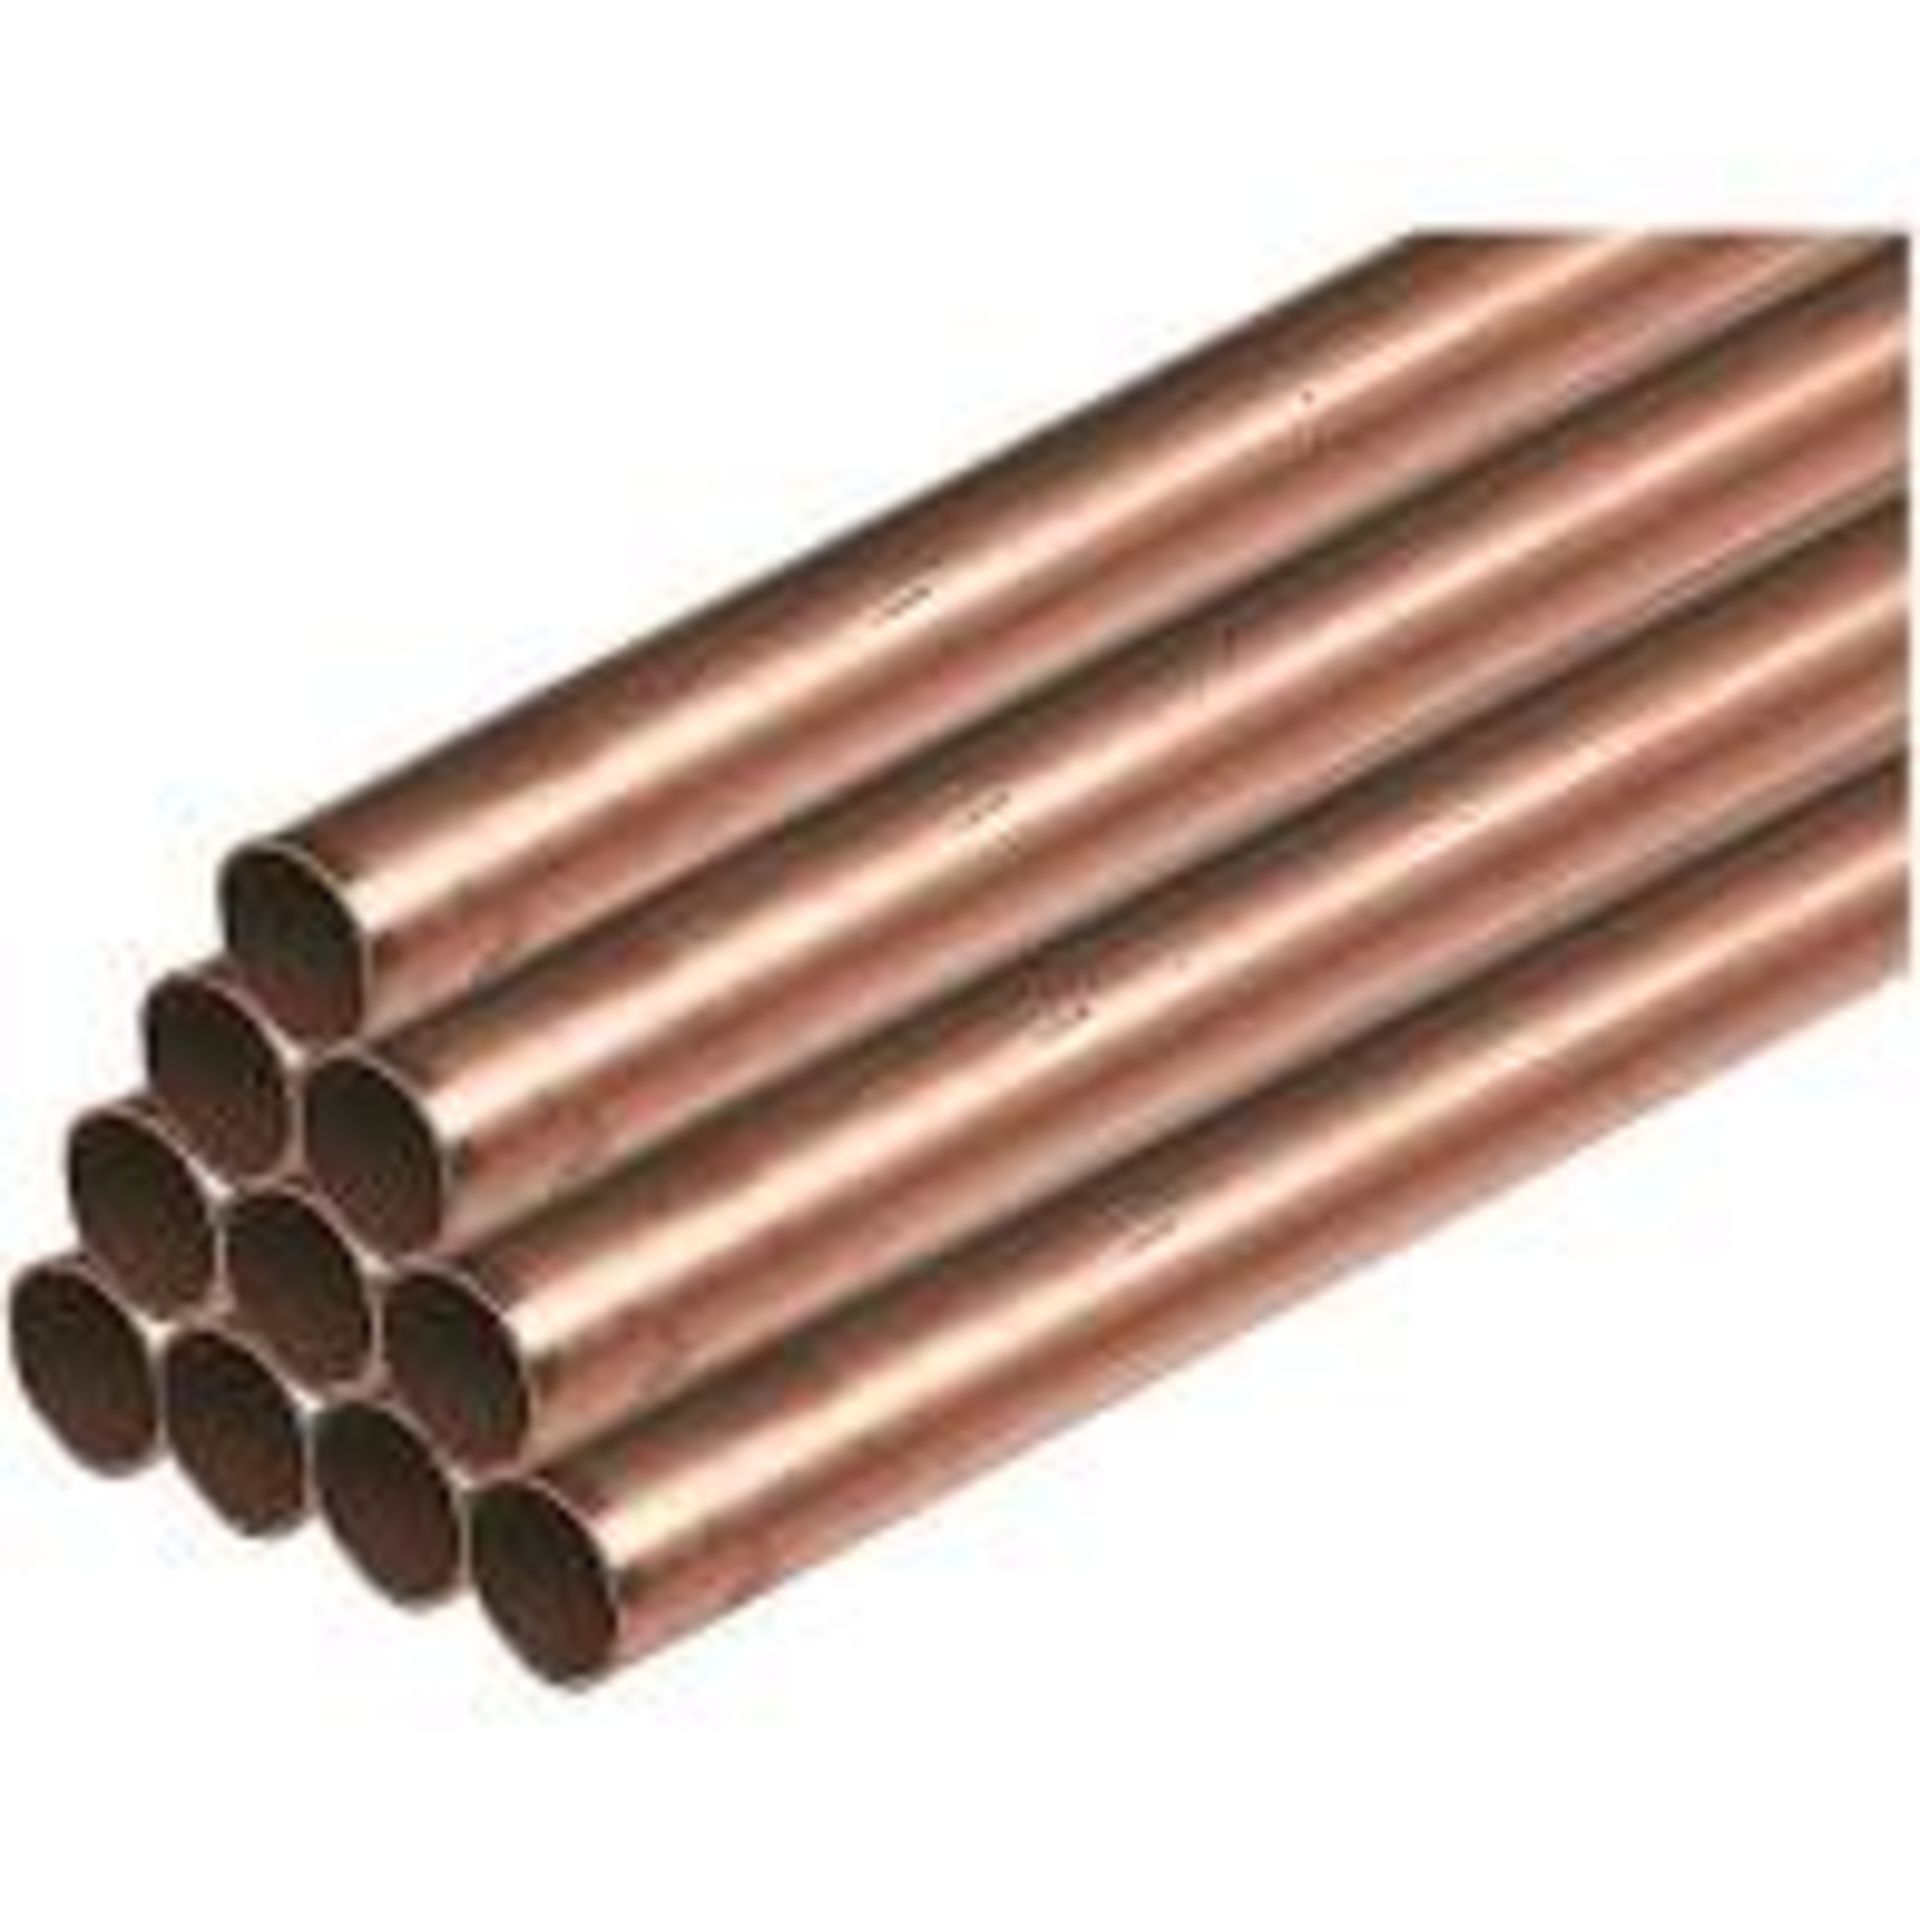 10 X 22MM COPPER PIPES 3MTR